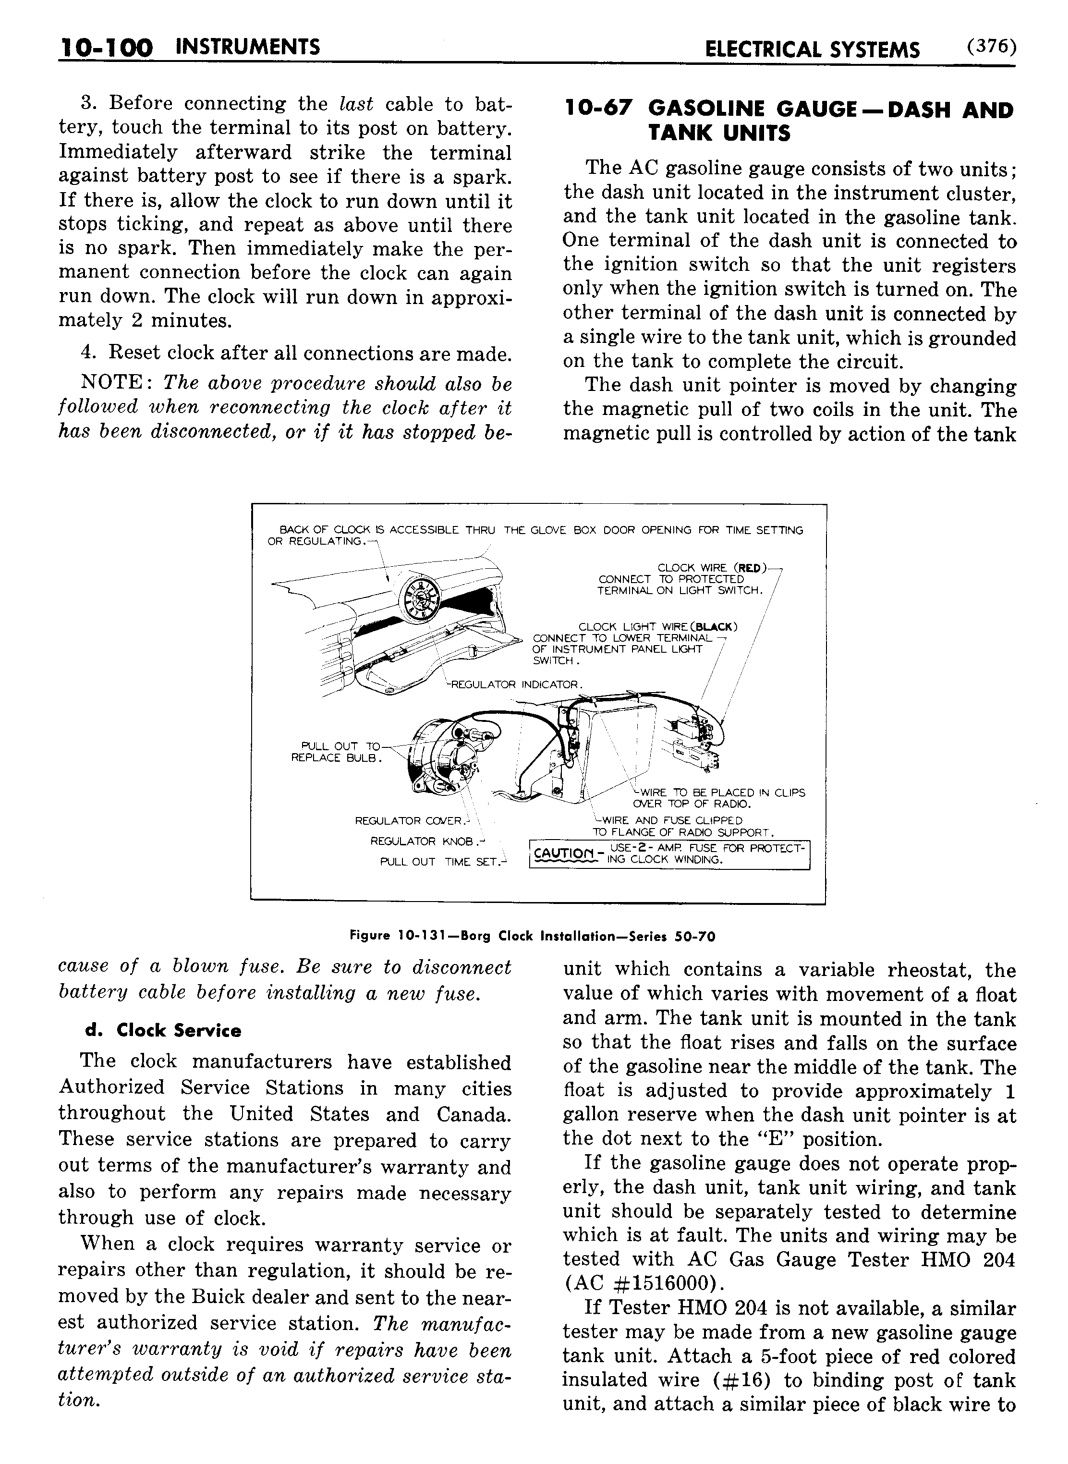 n_11 1948 Buick Shop Manual - Electrical Systems-100-100.jpg